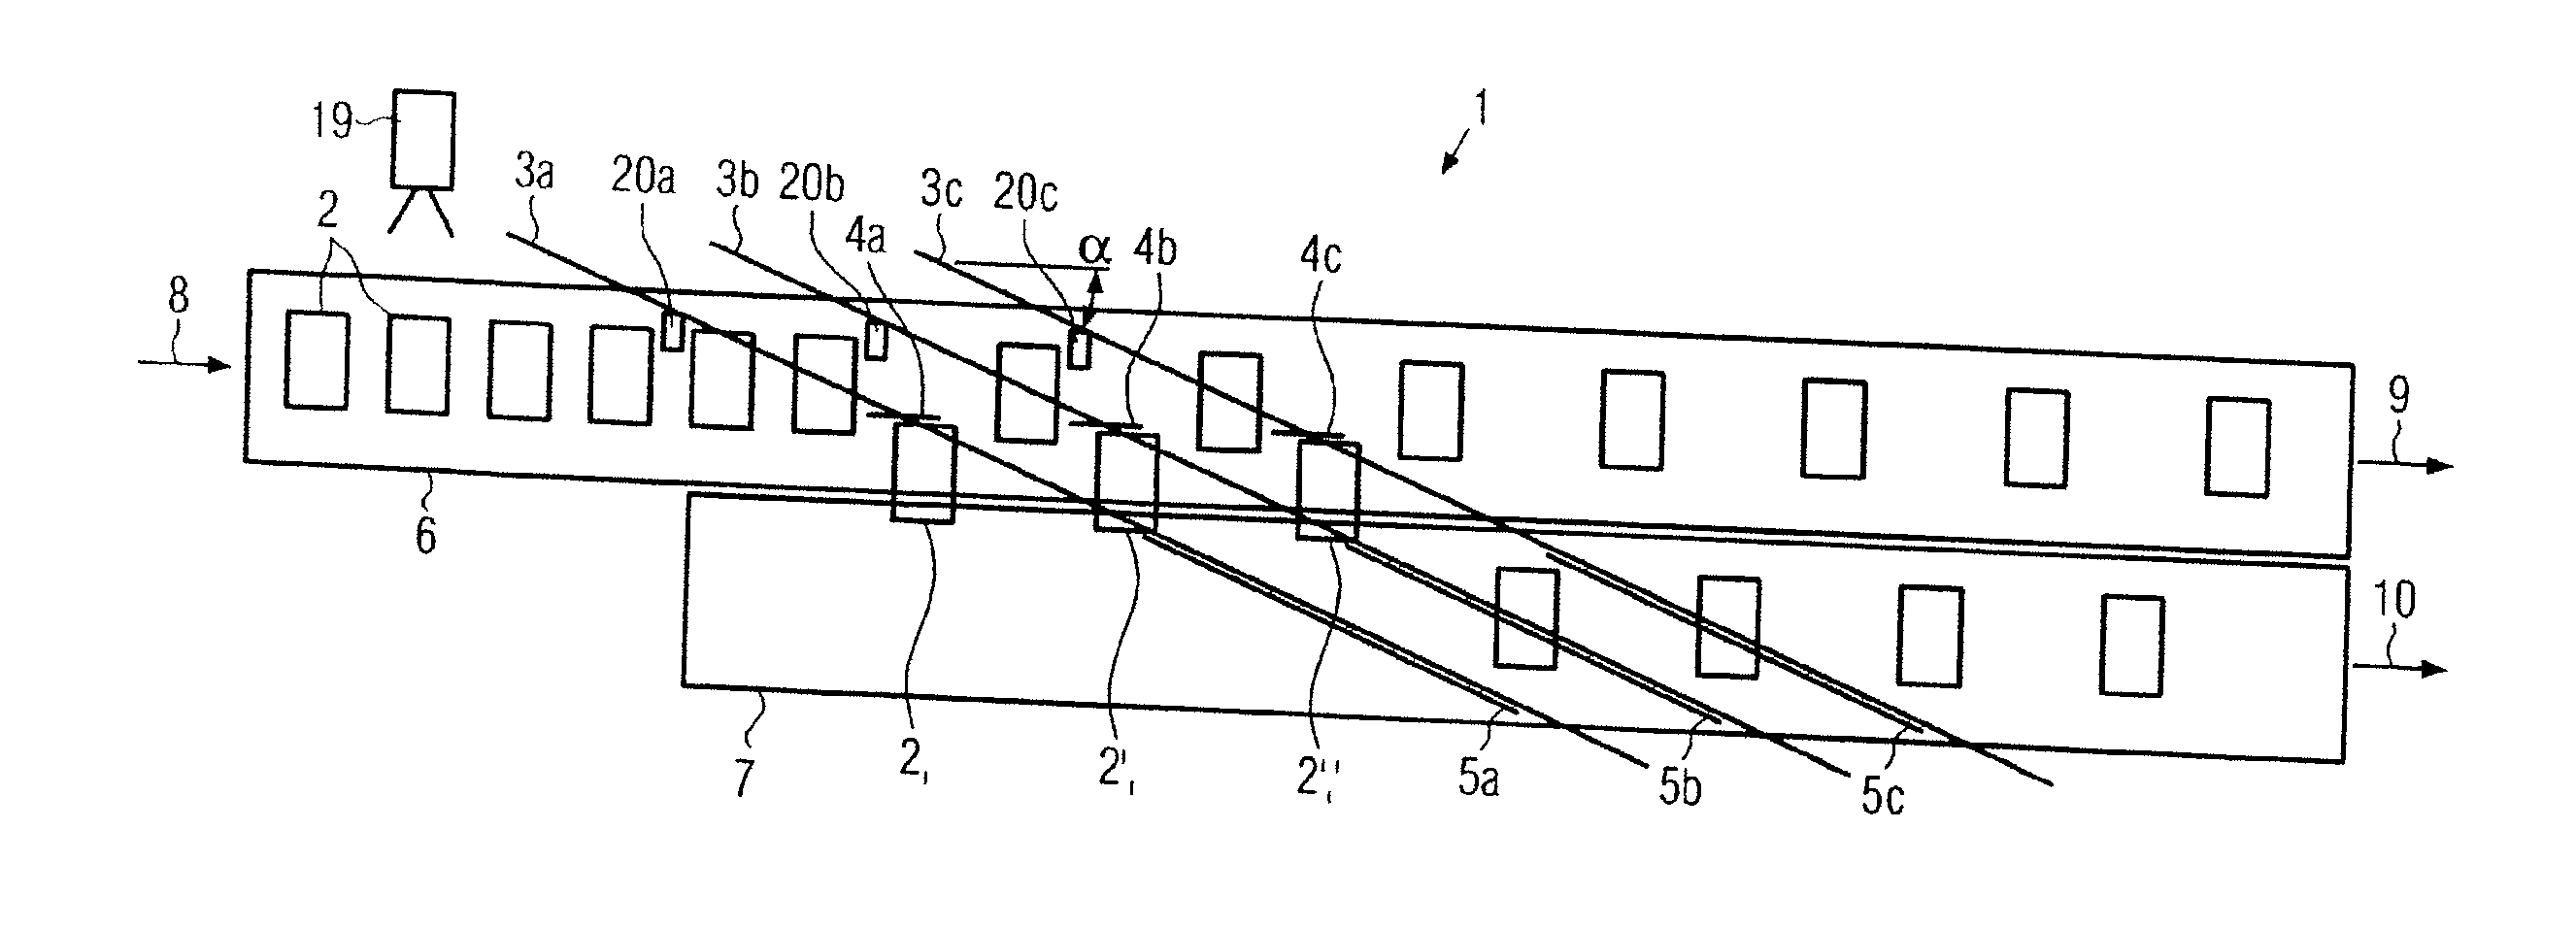 System and method for dividing a flow of objects